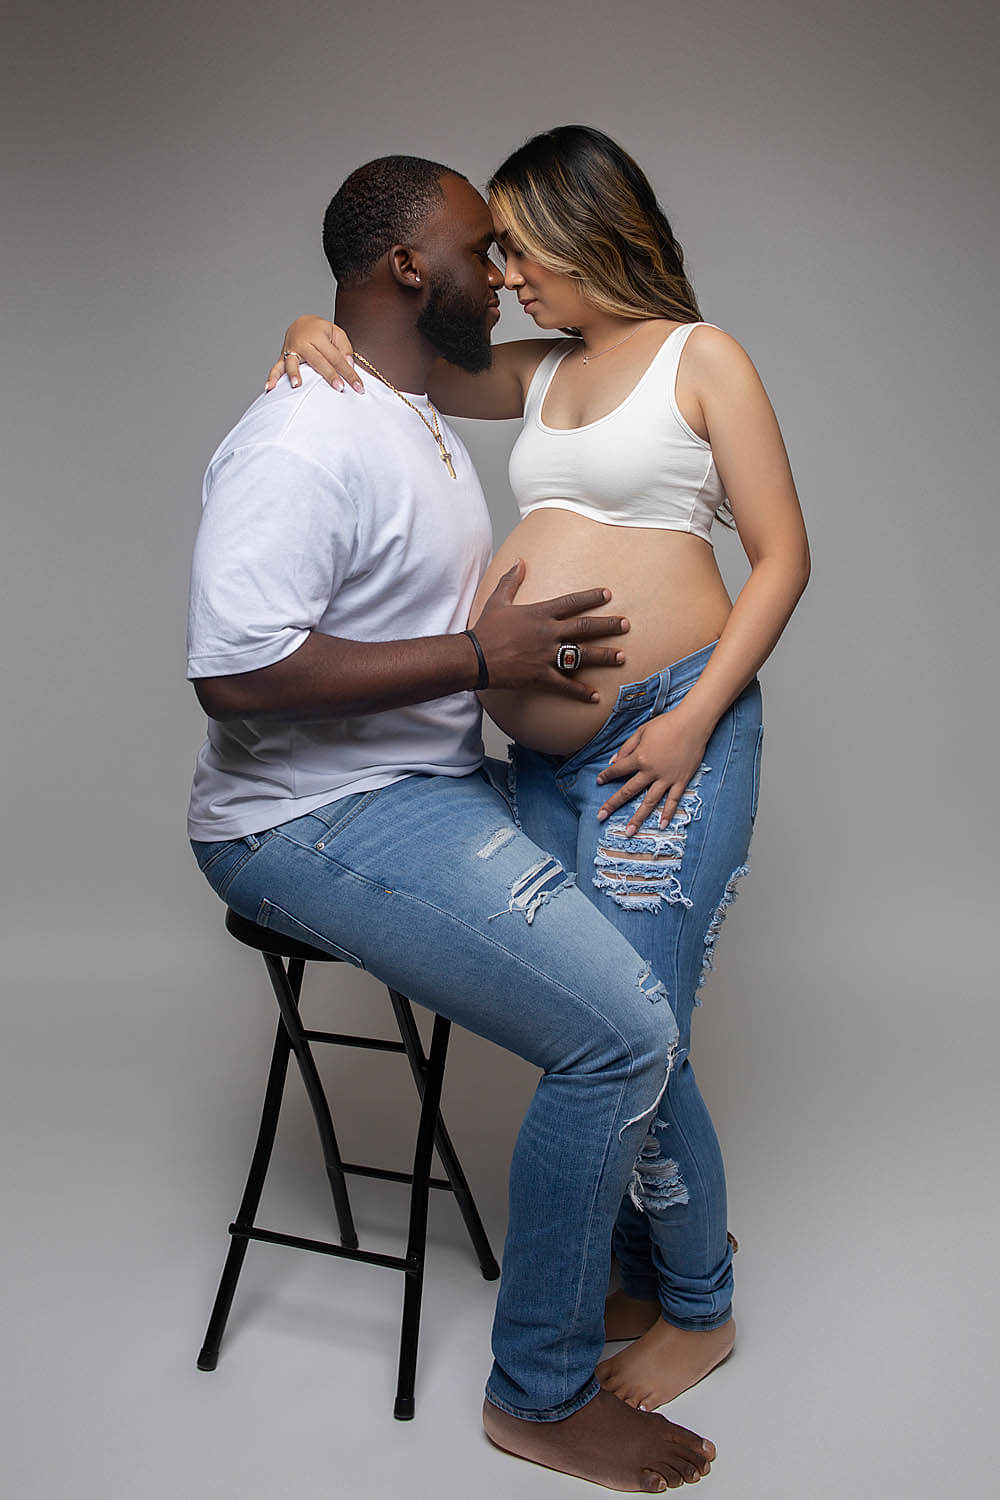 Pregnant couple maternity photoshoot in cooper city, fl